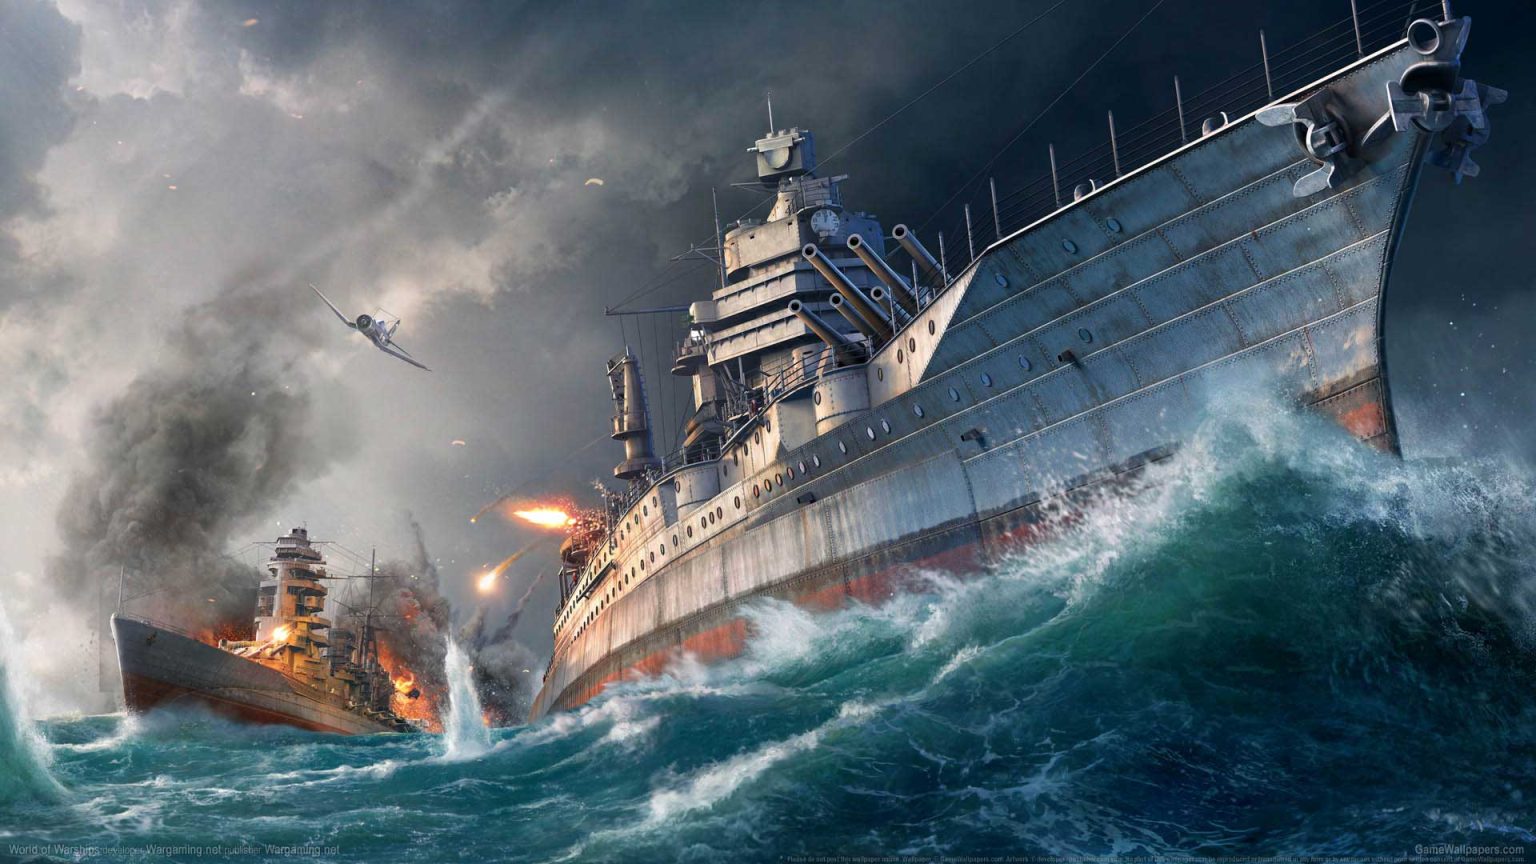 world of warships review 2020